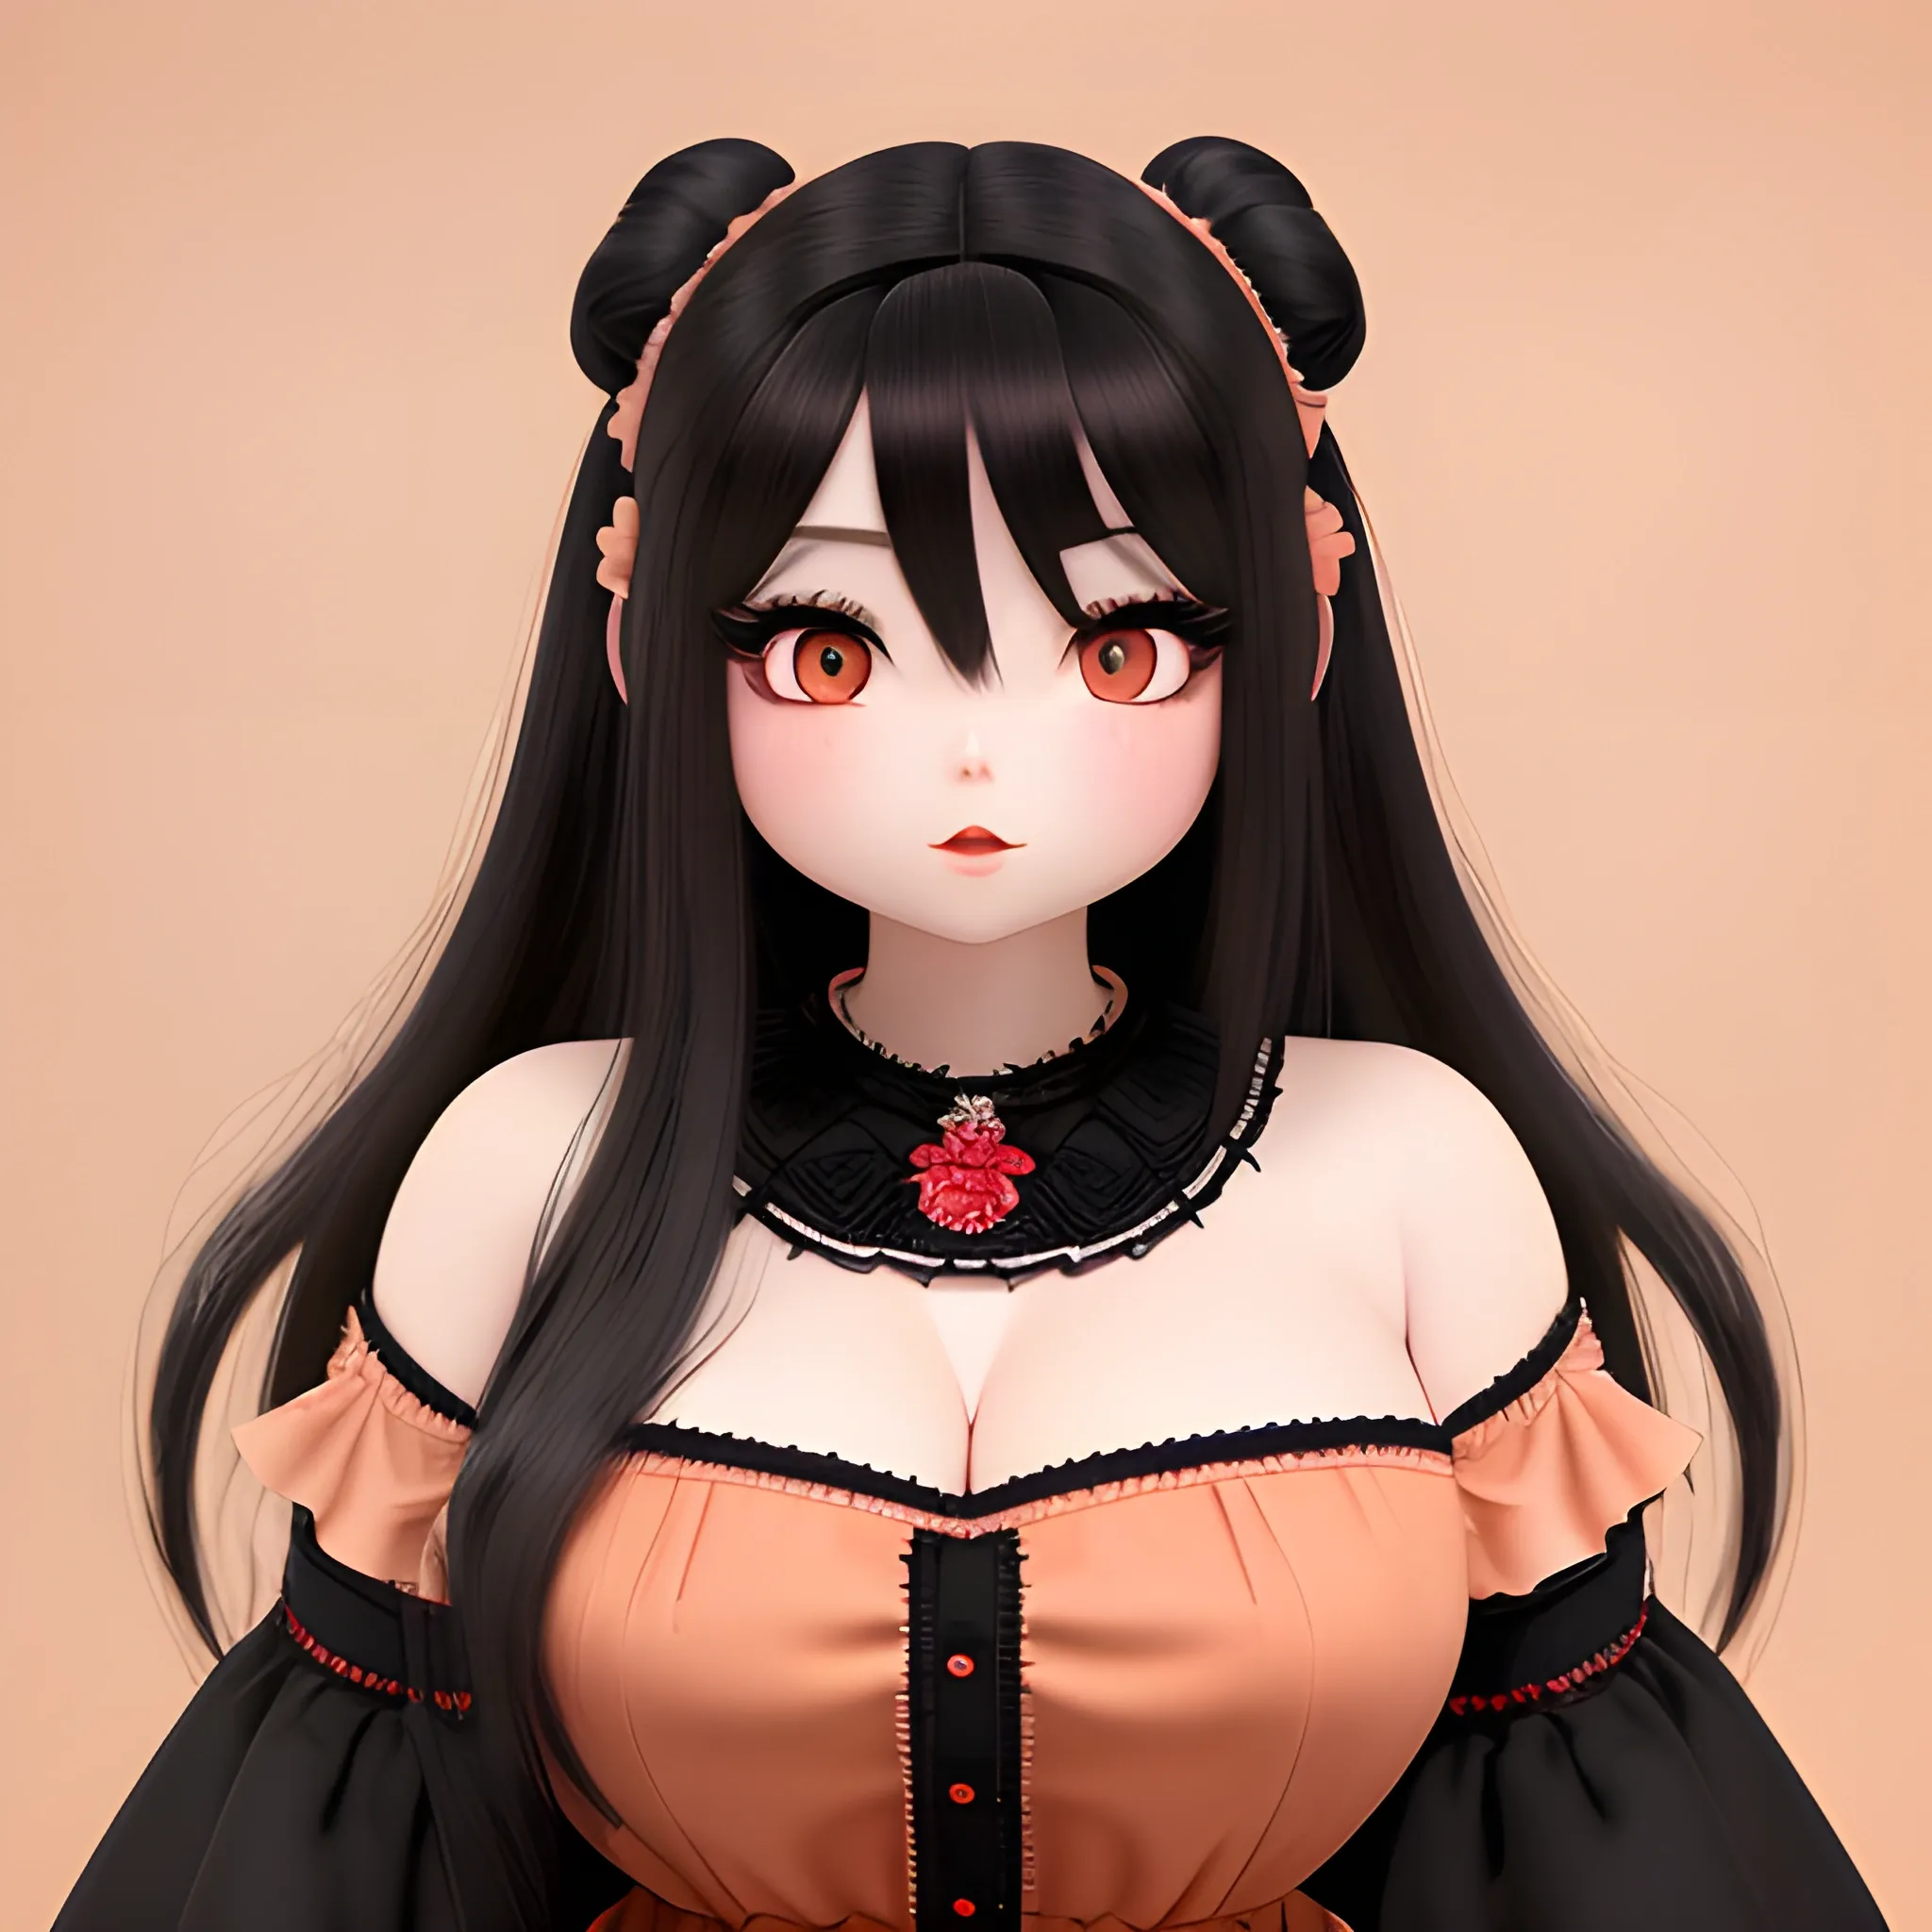 (((high detail))), best quality, Warm Colors, (detailed), (high resolution)Black long-haired female adult, full body, curvy face, with rosy cheeks, big black eyes, thick eyelashes, thick peach lips, thick eyebrows,  with a black and red dress  saying i want the harem